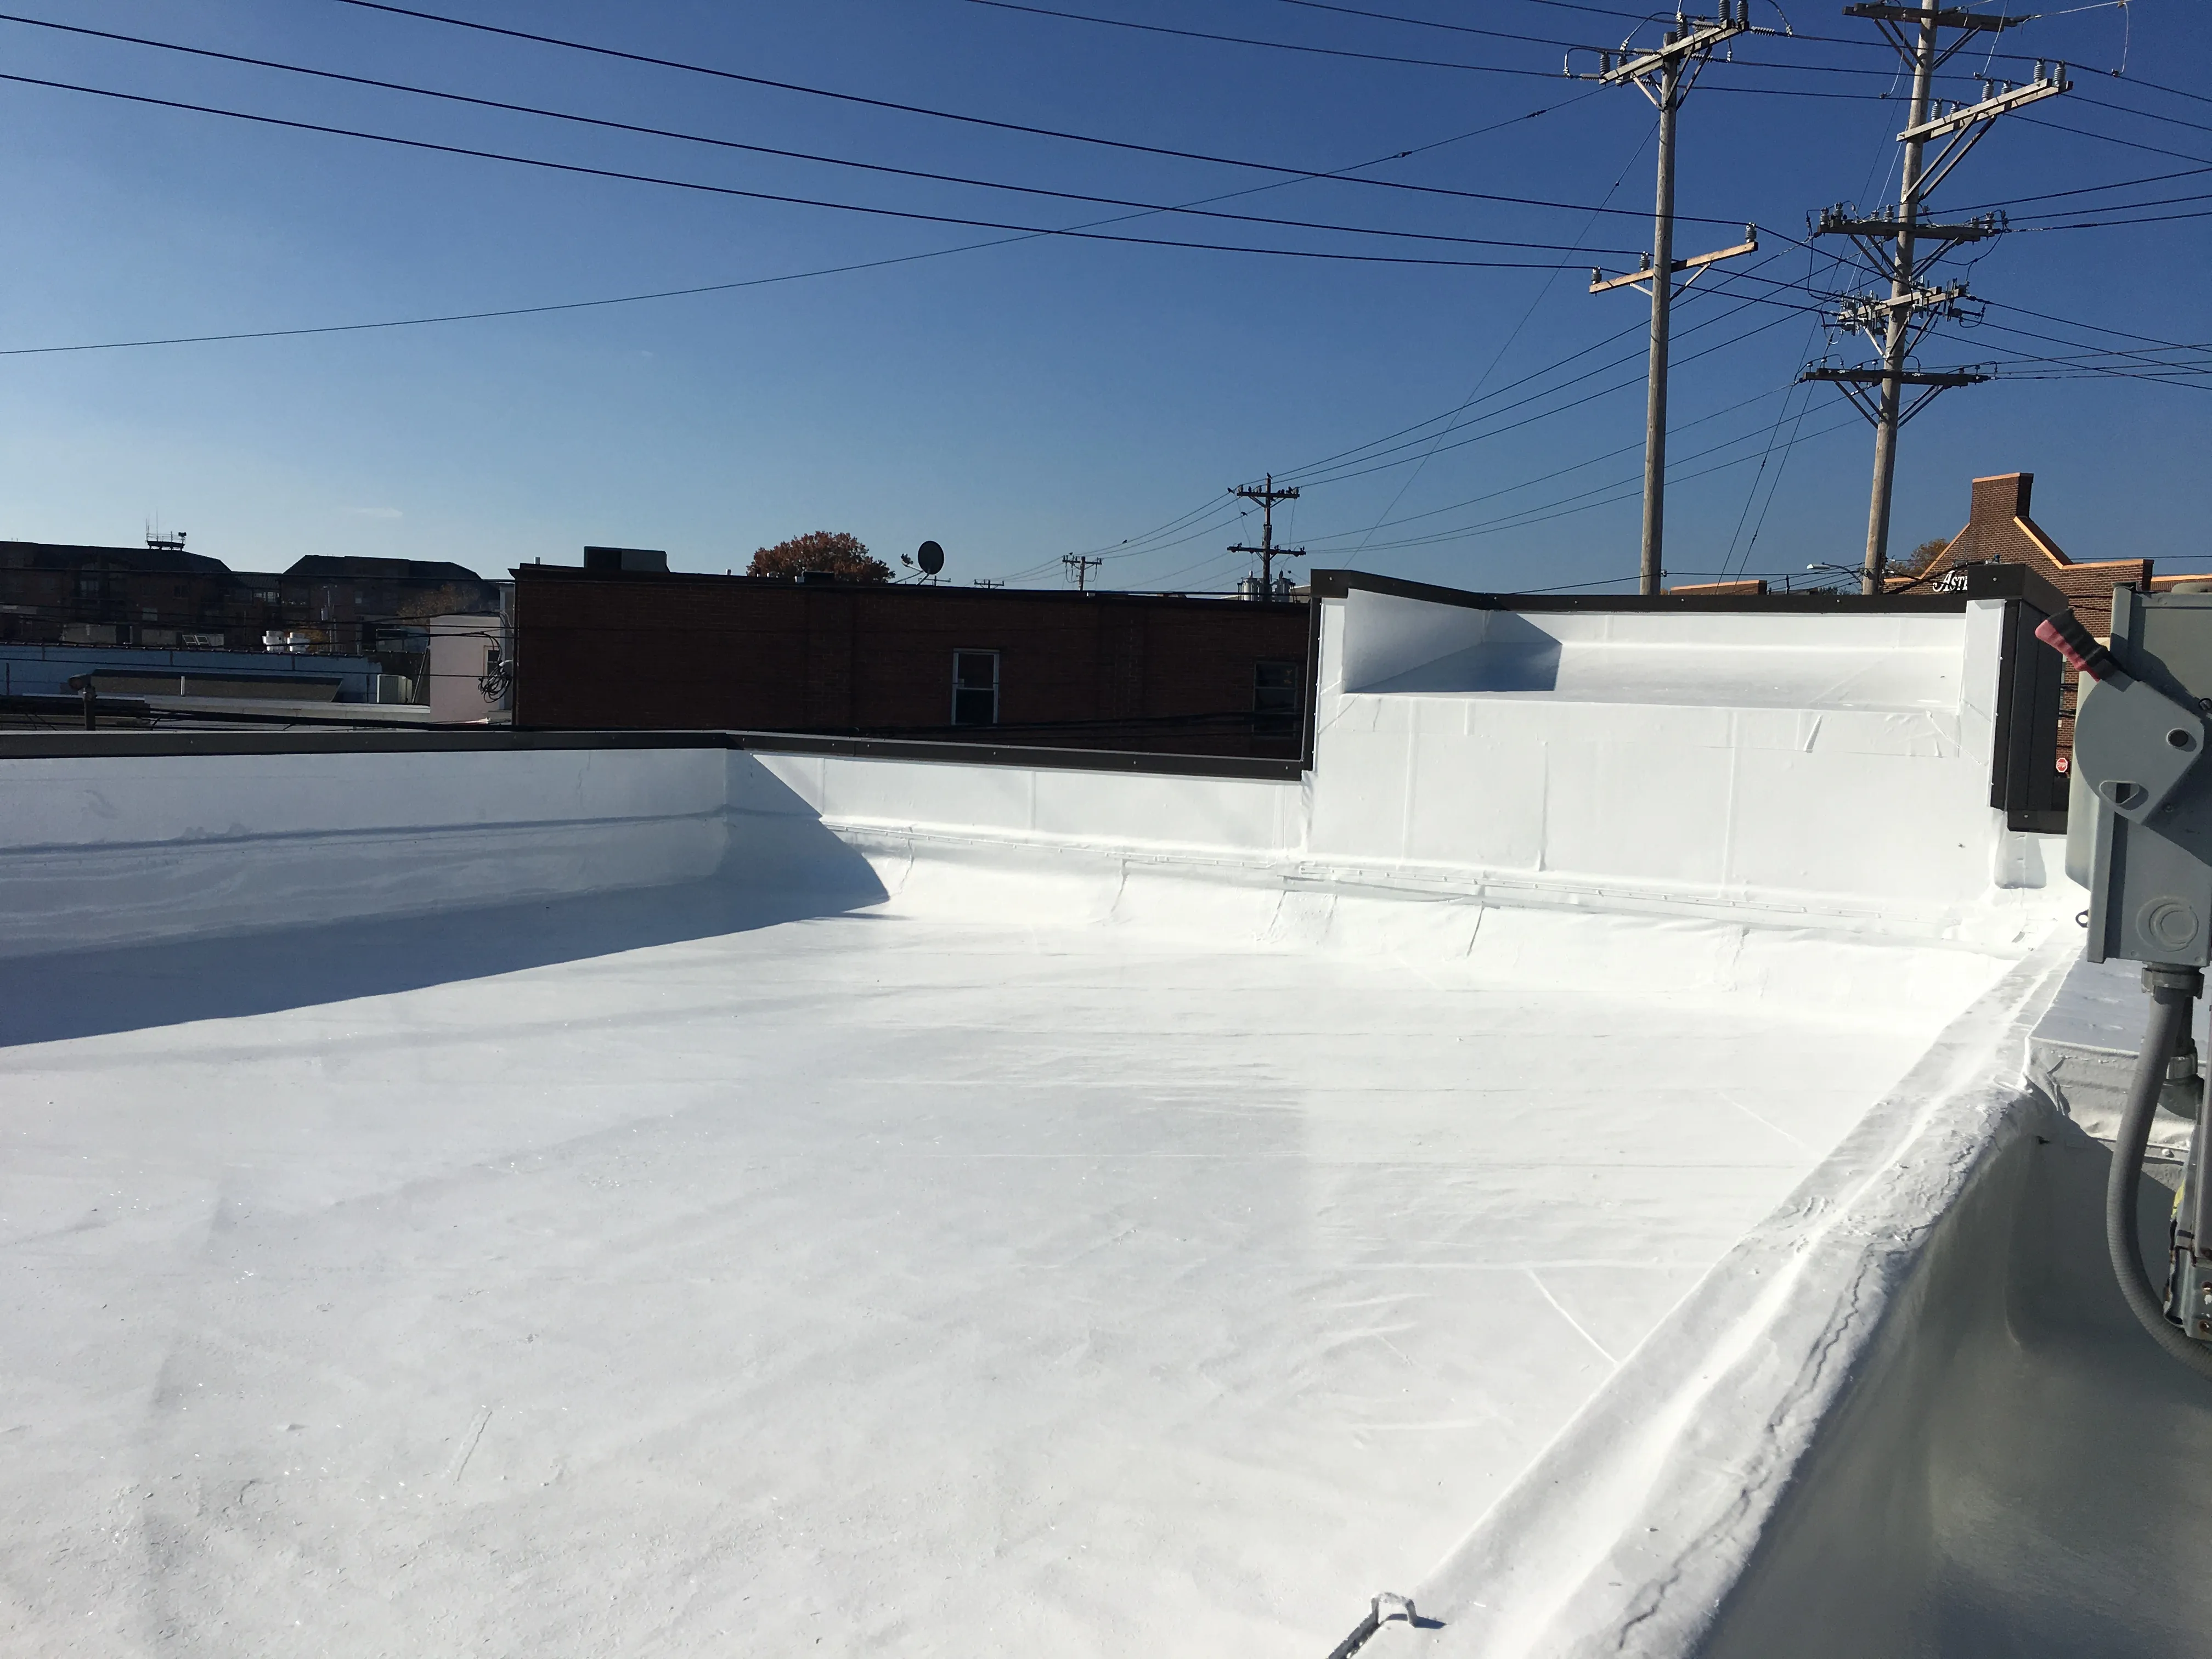 The median temperature differential between an ECRS-coated and an uncoated roof is 45-55 degrees Fahrenheit in high heat